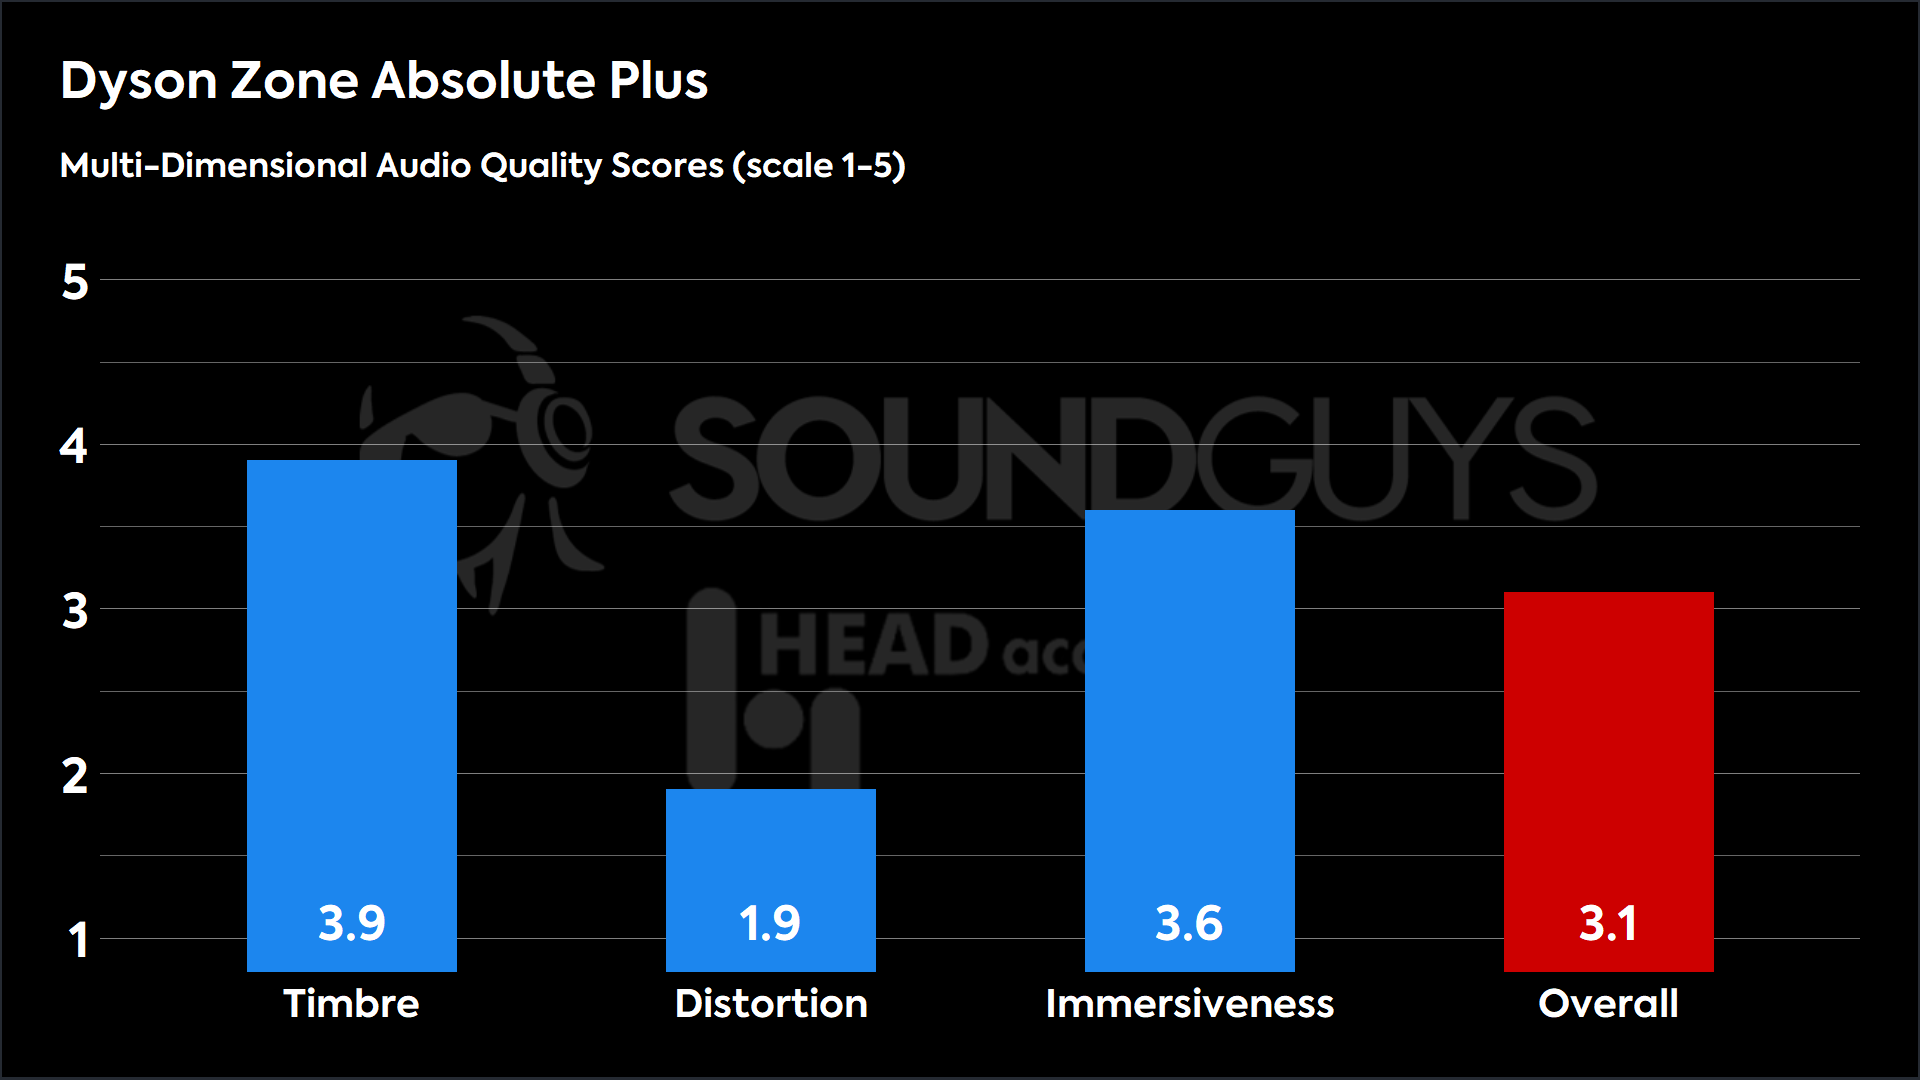 A breakdown of the Multi-Dimensional Audio Quality Scores earned by the Dyson Zone Absolute Plus.